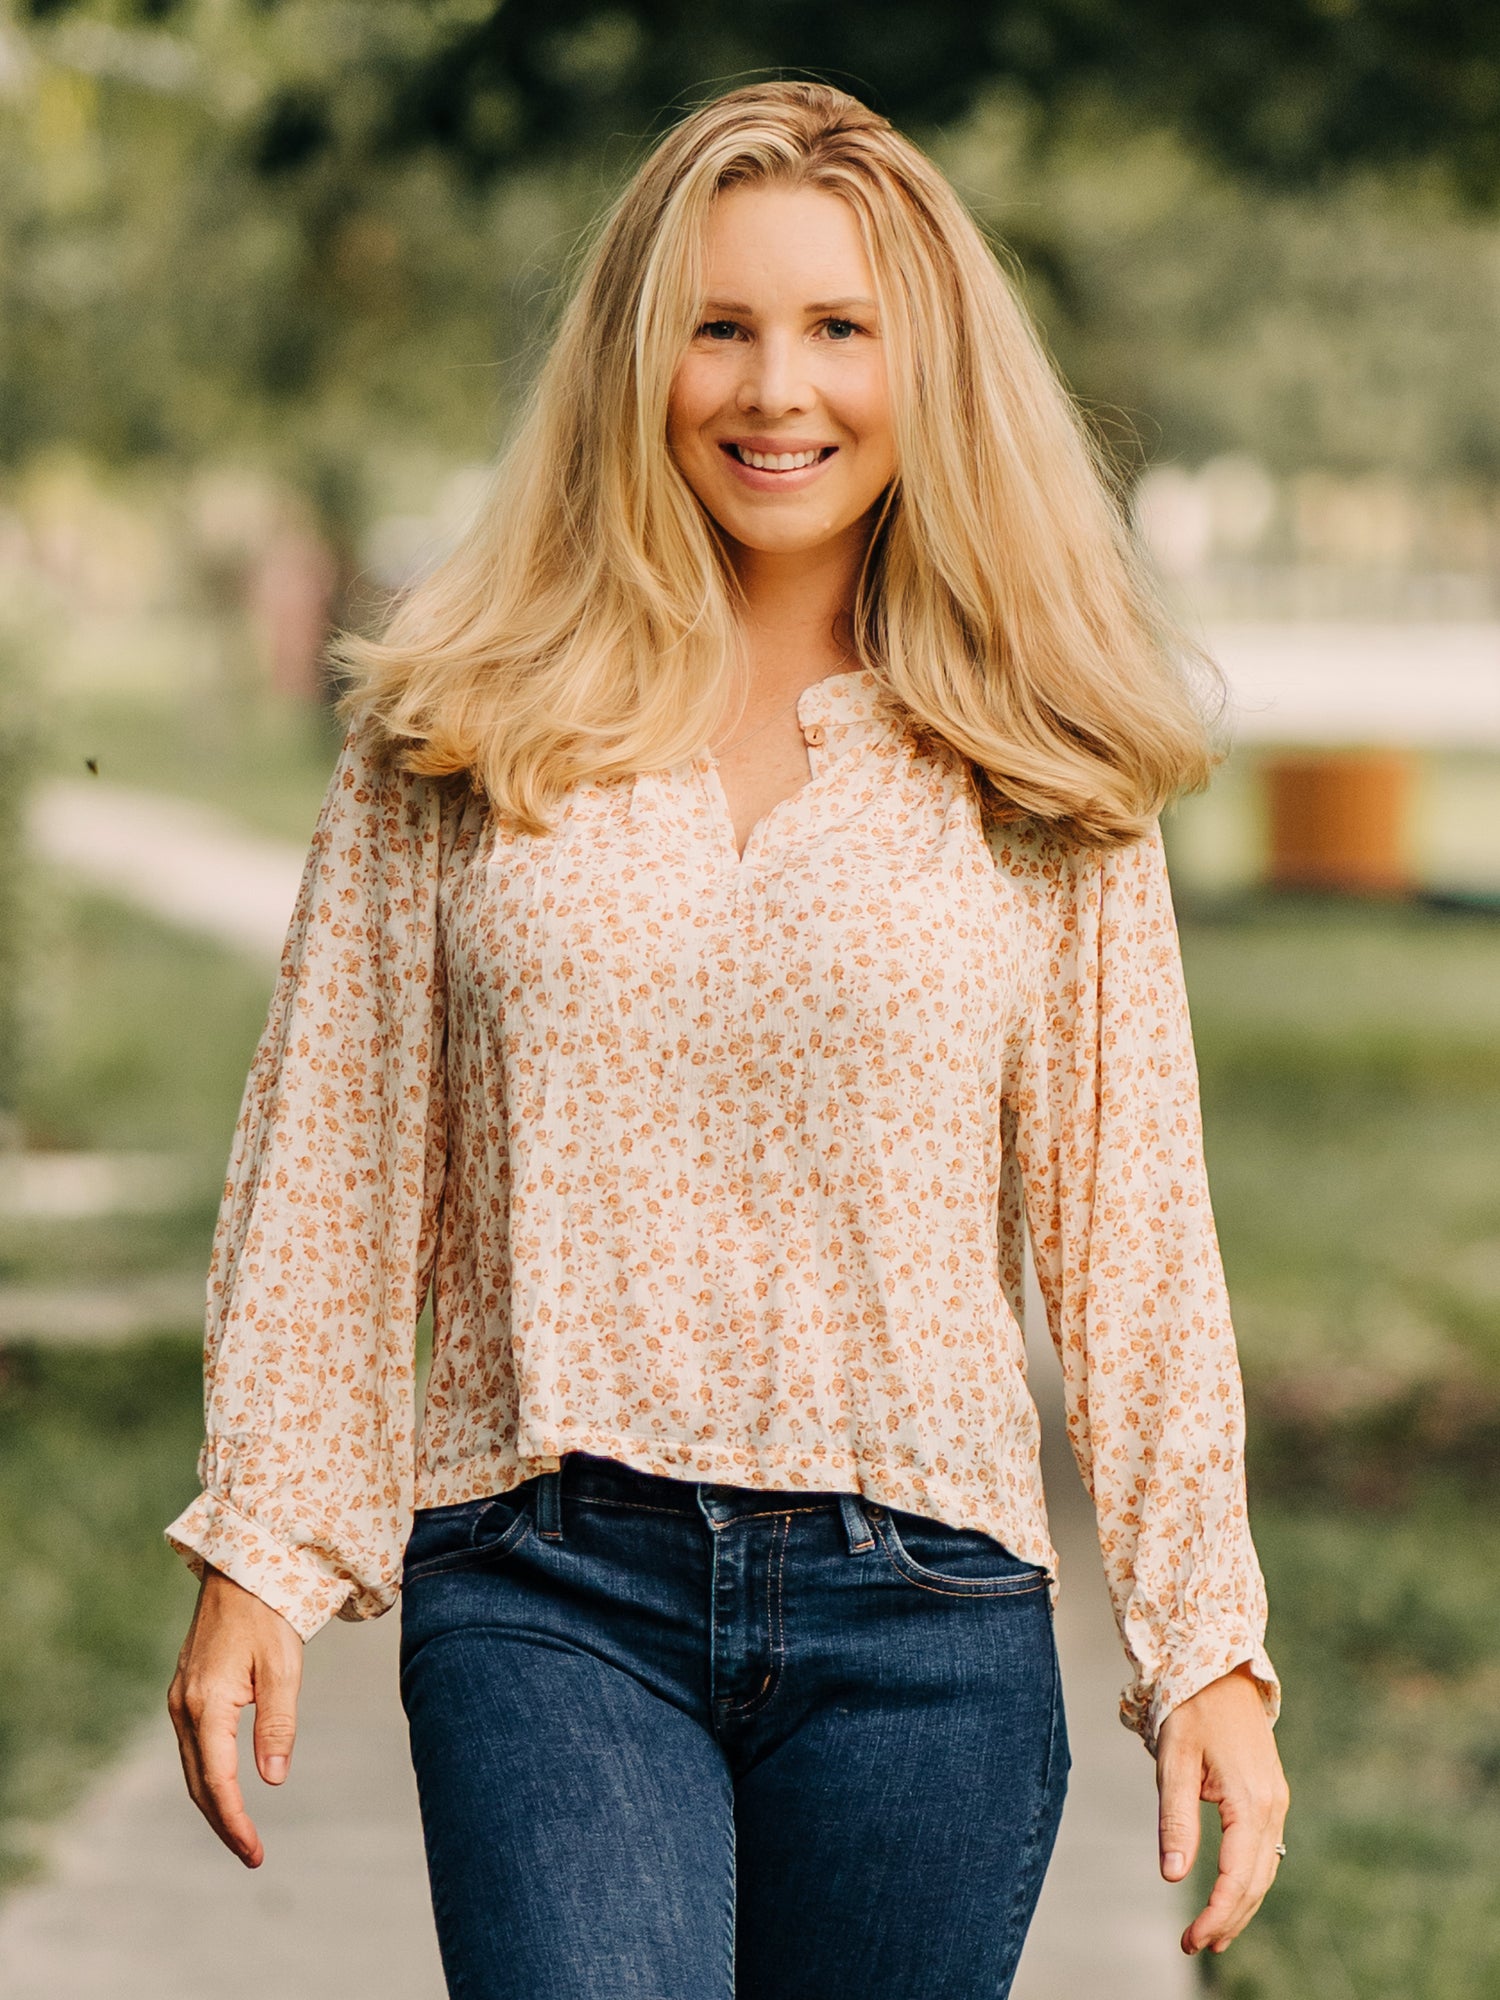 This image of a woman features the product Women's Long Sleeve Blouse - Golden Floral. This billowy long sleeve top has a keyhole neck with a single button. It comes in a pattern of small gold roses on a cream background.